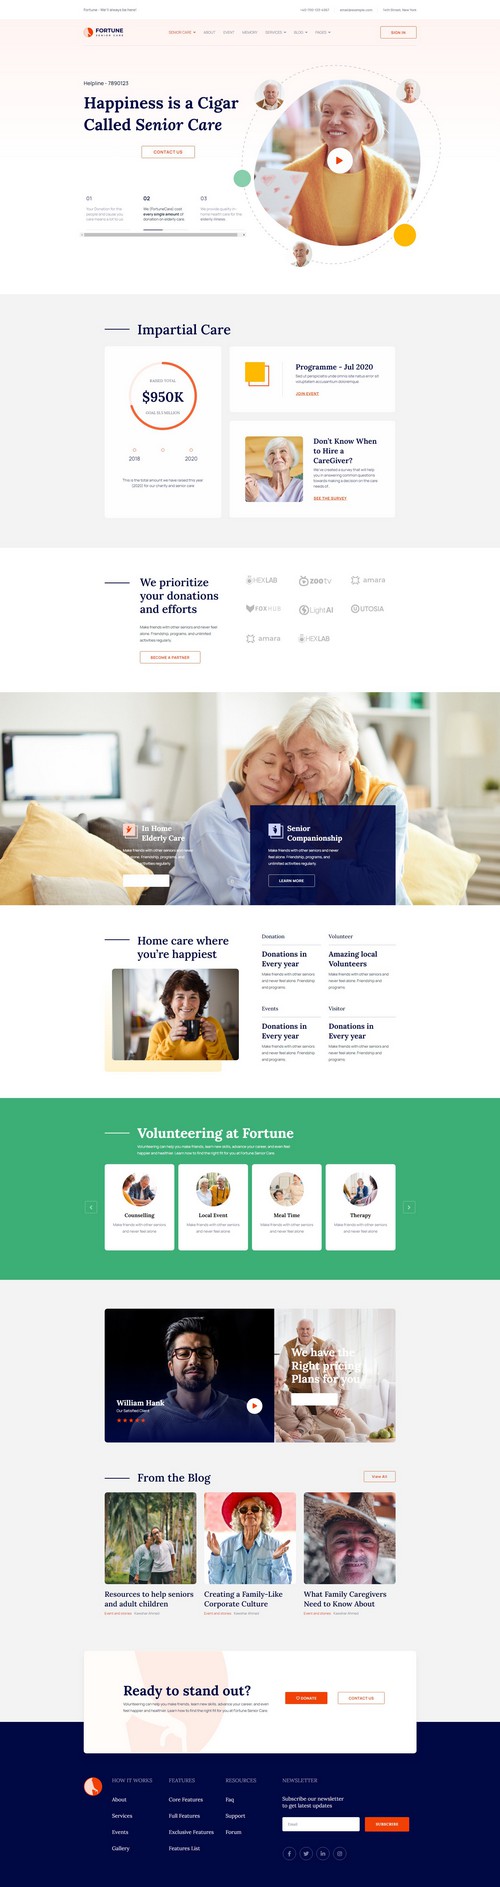 Fortune - Elderly Care and Old Age Home Template for Joomla